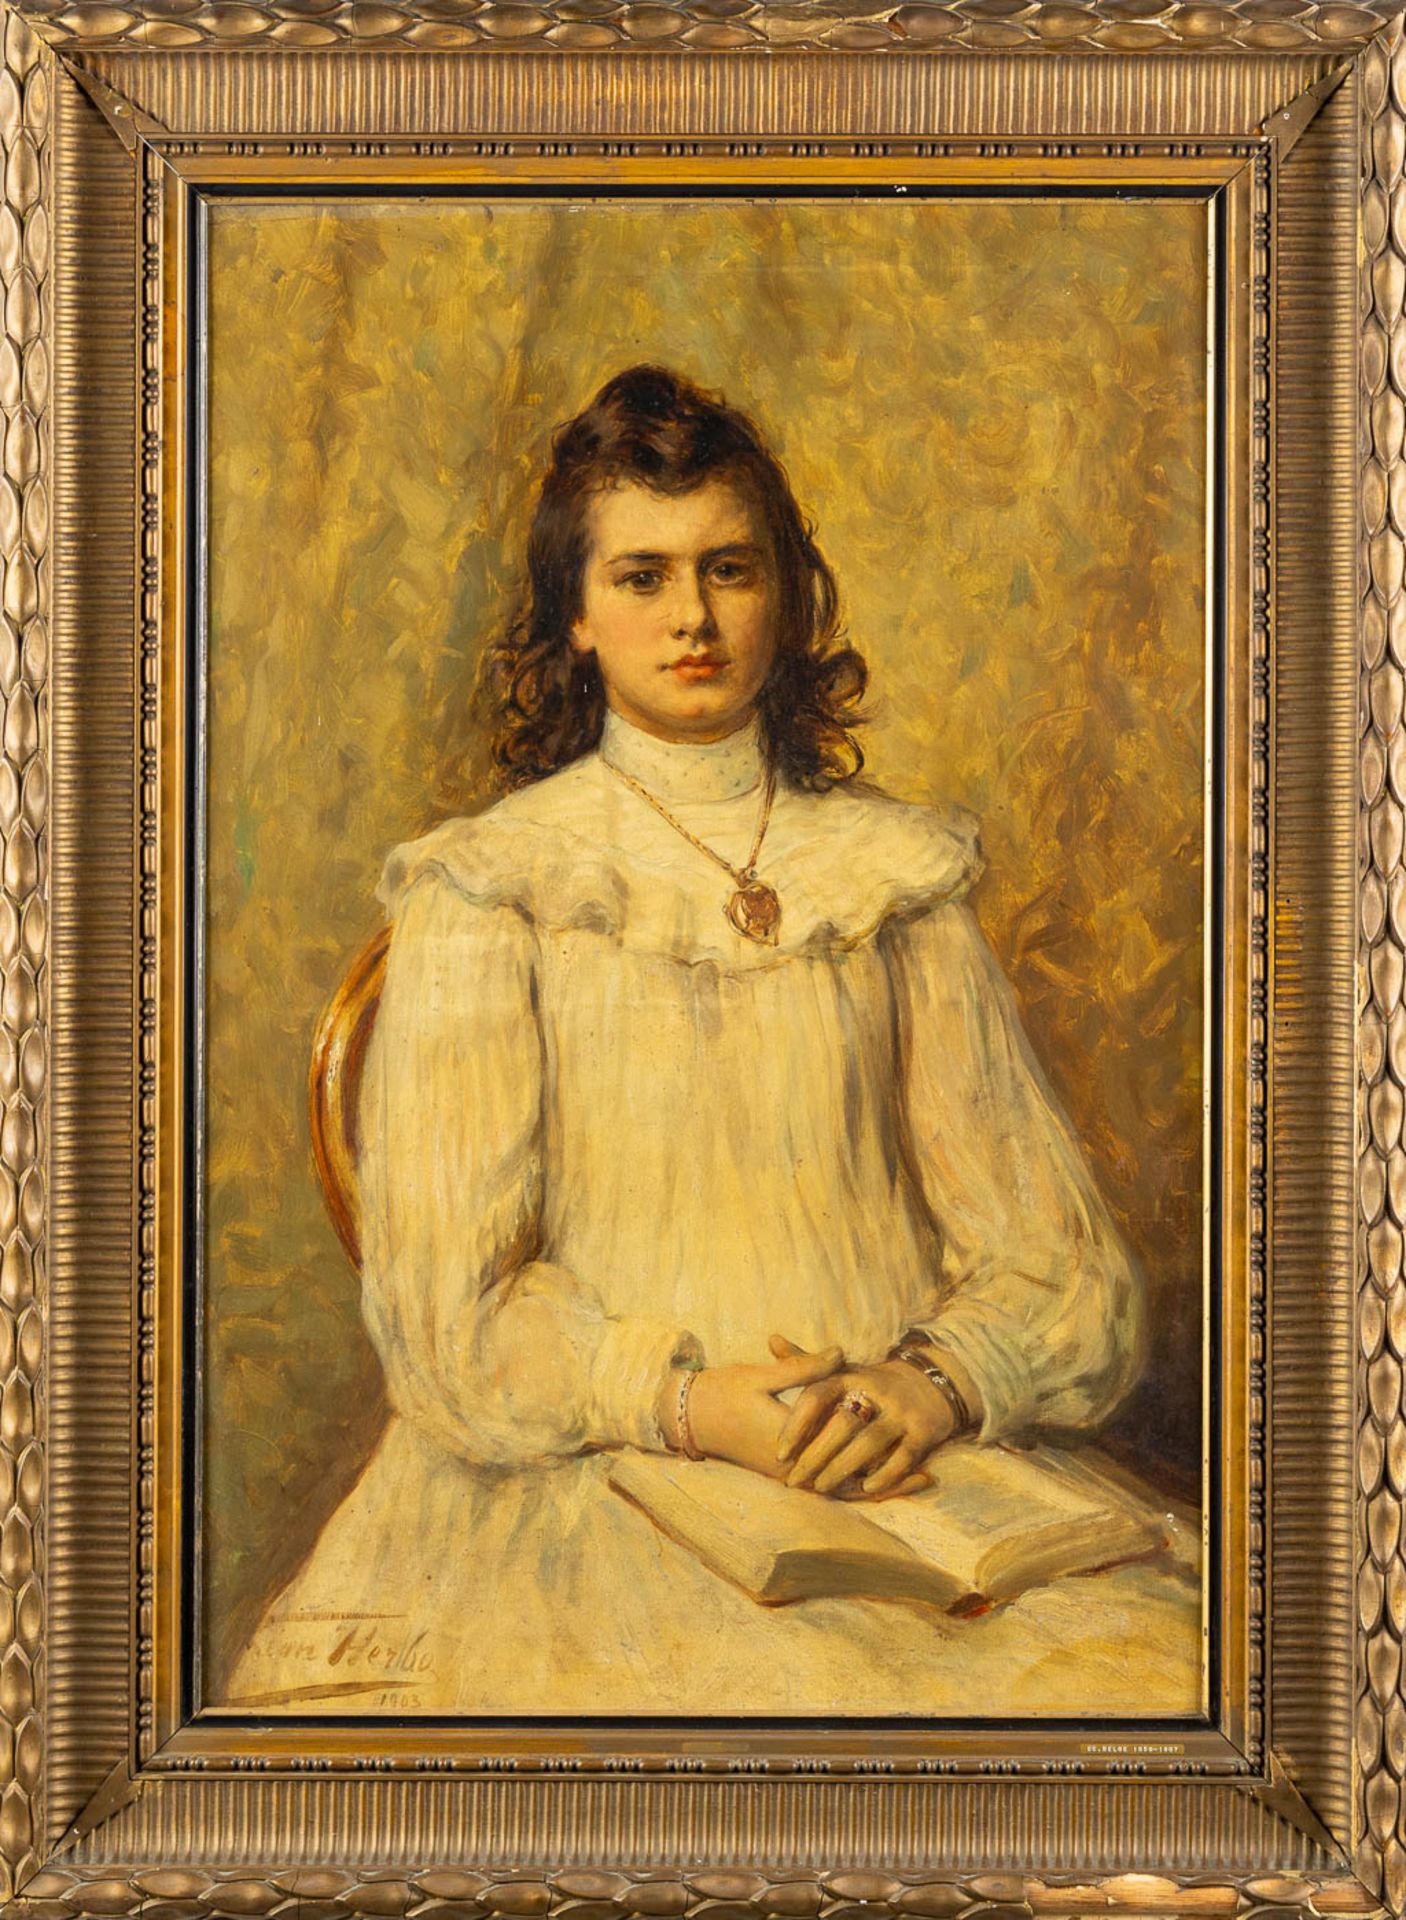 Léon HERBO (1850-1907) 'Portrait of a girl' oil on canvas. 1903. (W:67 x H:100 cm) - Image 3 of 10